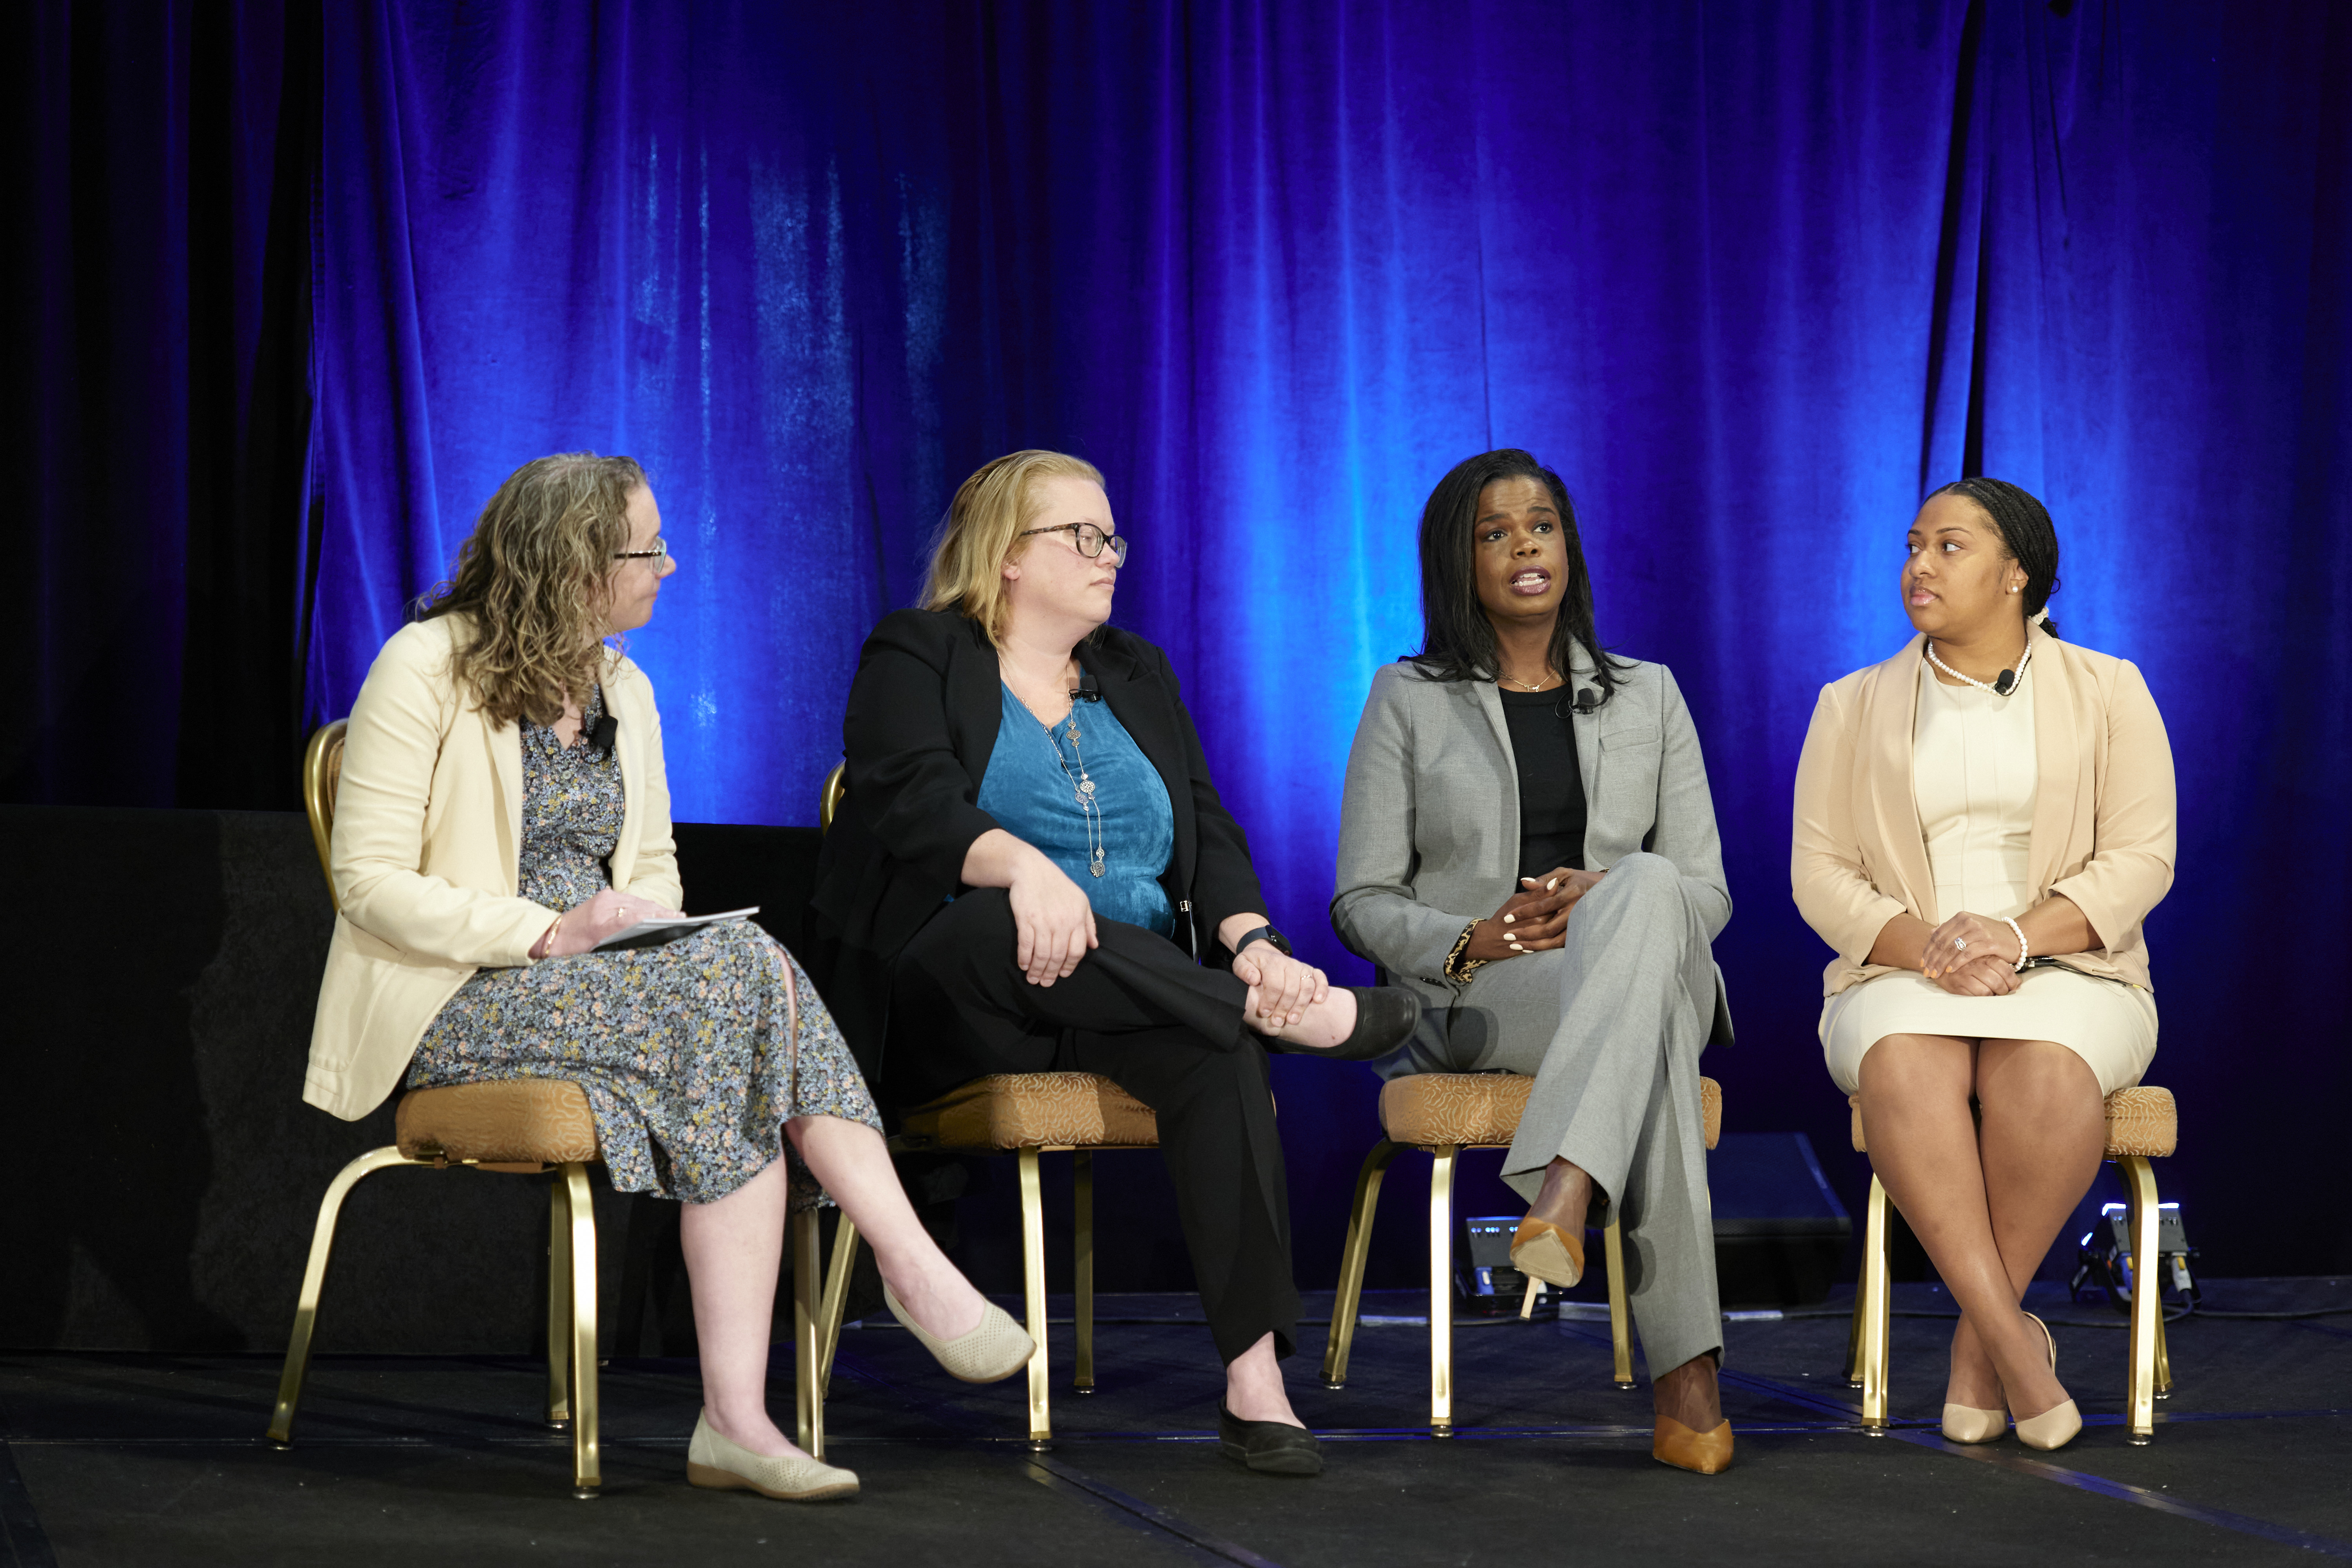 NIJ 2023 Research Conference plenary "Can Science Enhance Equity? Findings and Implications From a Study To Detect Bruising on Victims with Dark Skin Pigmentation" participants Carrie Johnson, Dr. Katherine Scafide, Kimberly Foxx, and Chantel Hammond